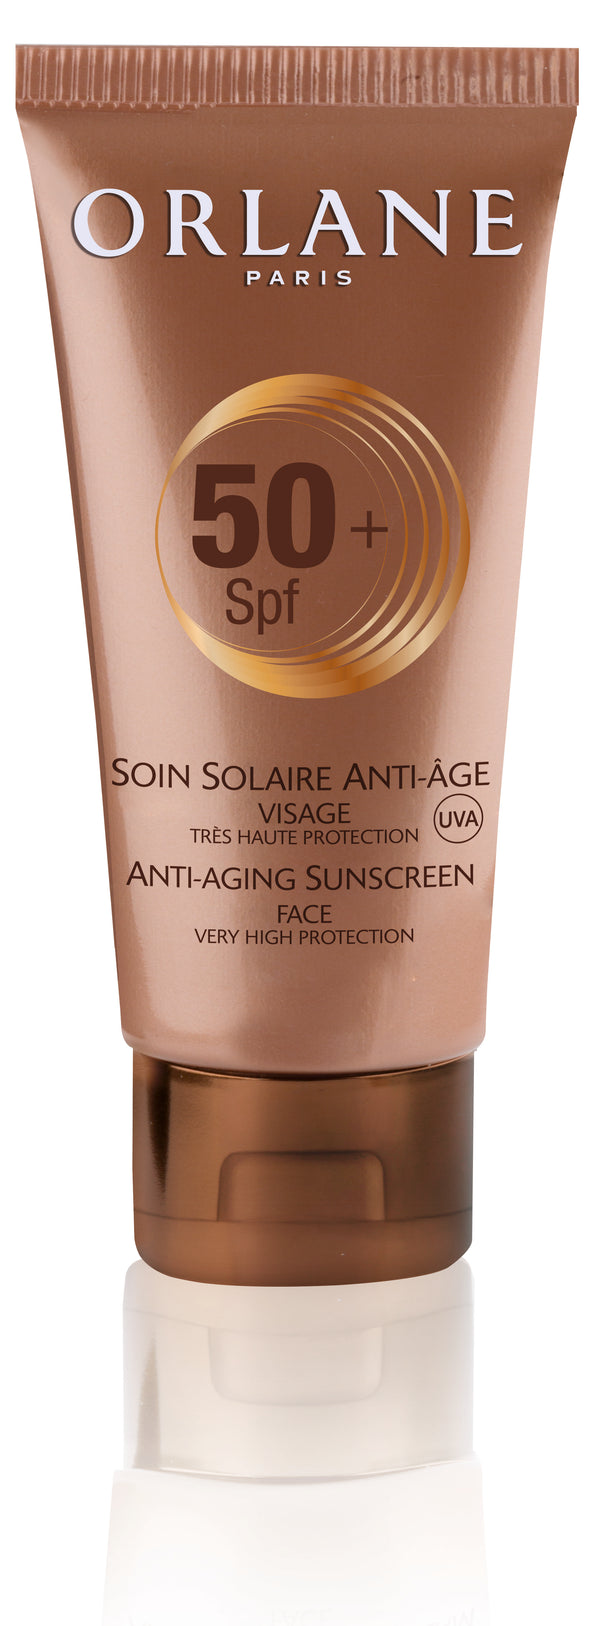 Orlane Soin Solaire Anti-Age Visage SPF 50